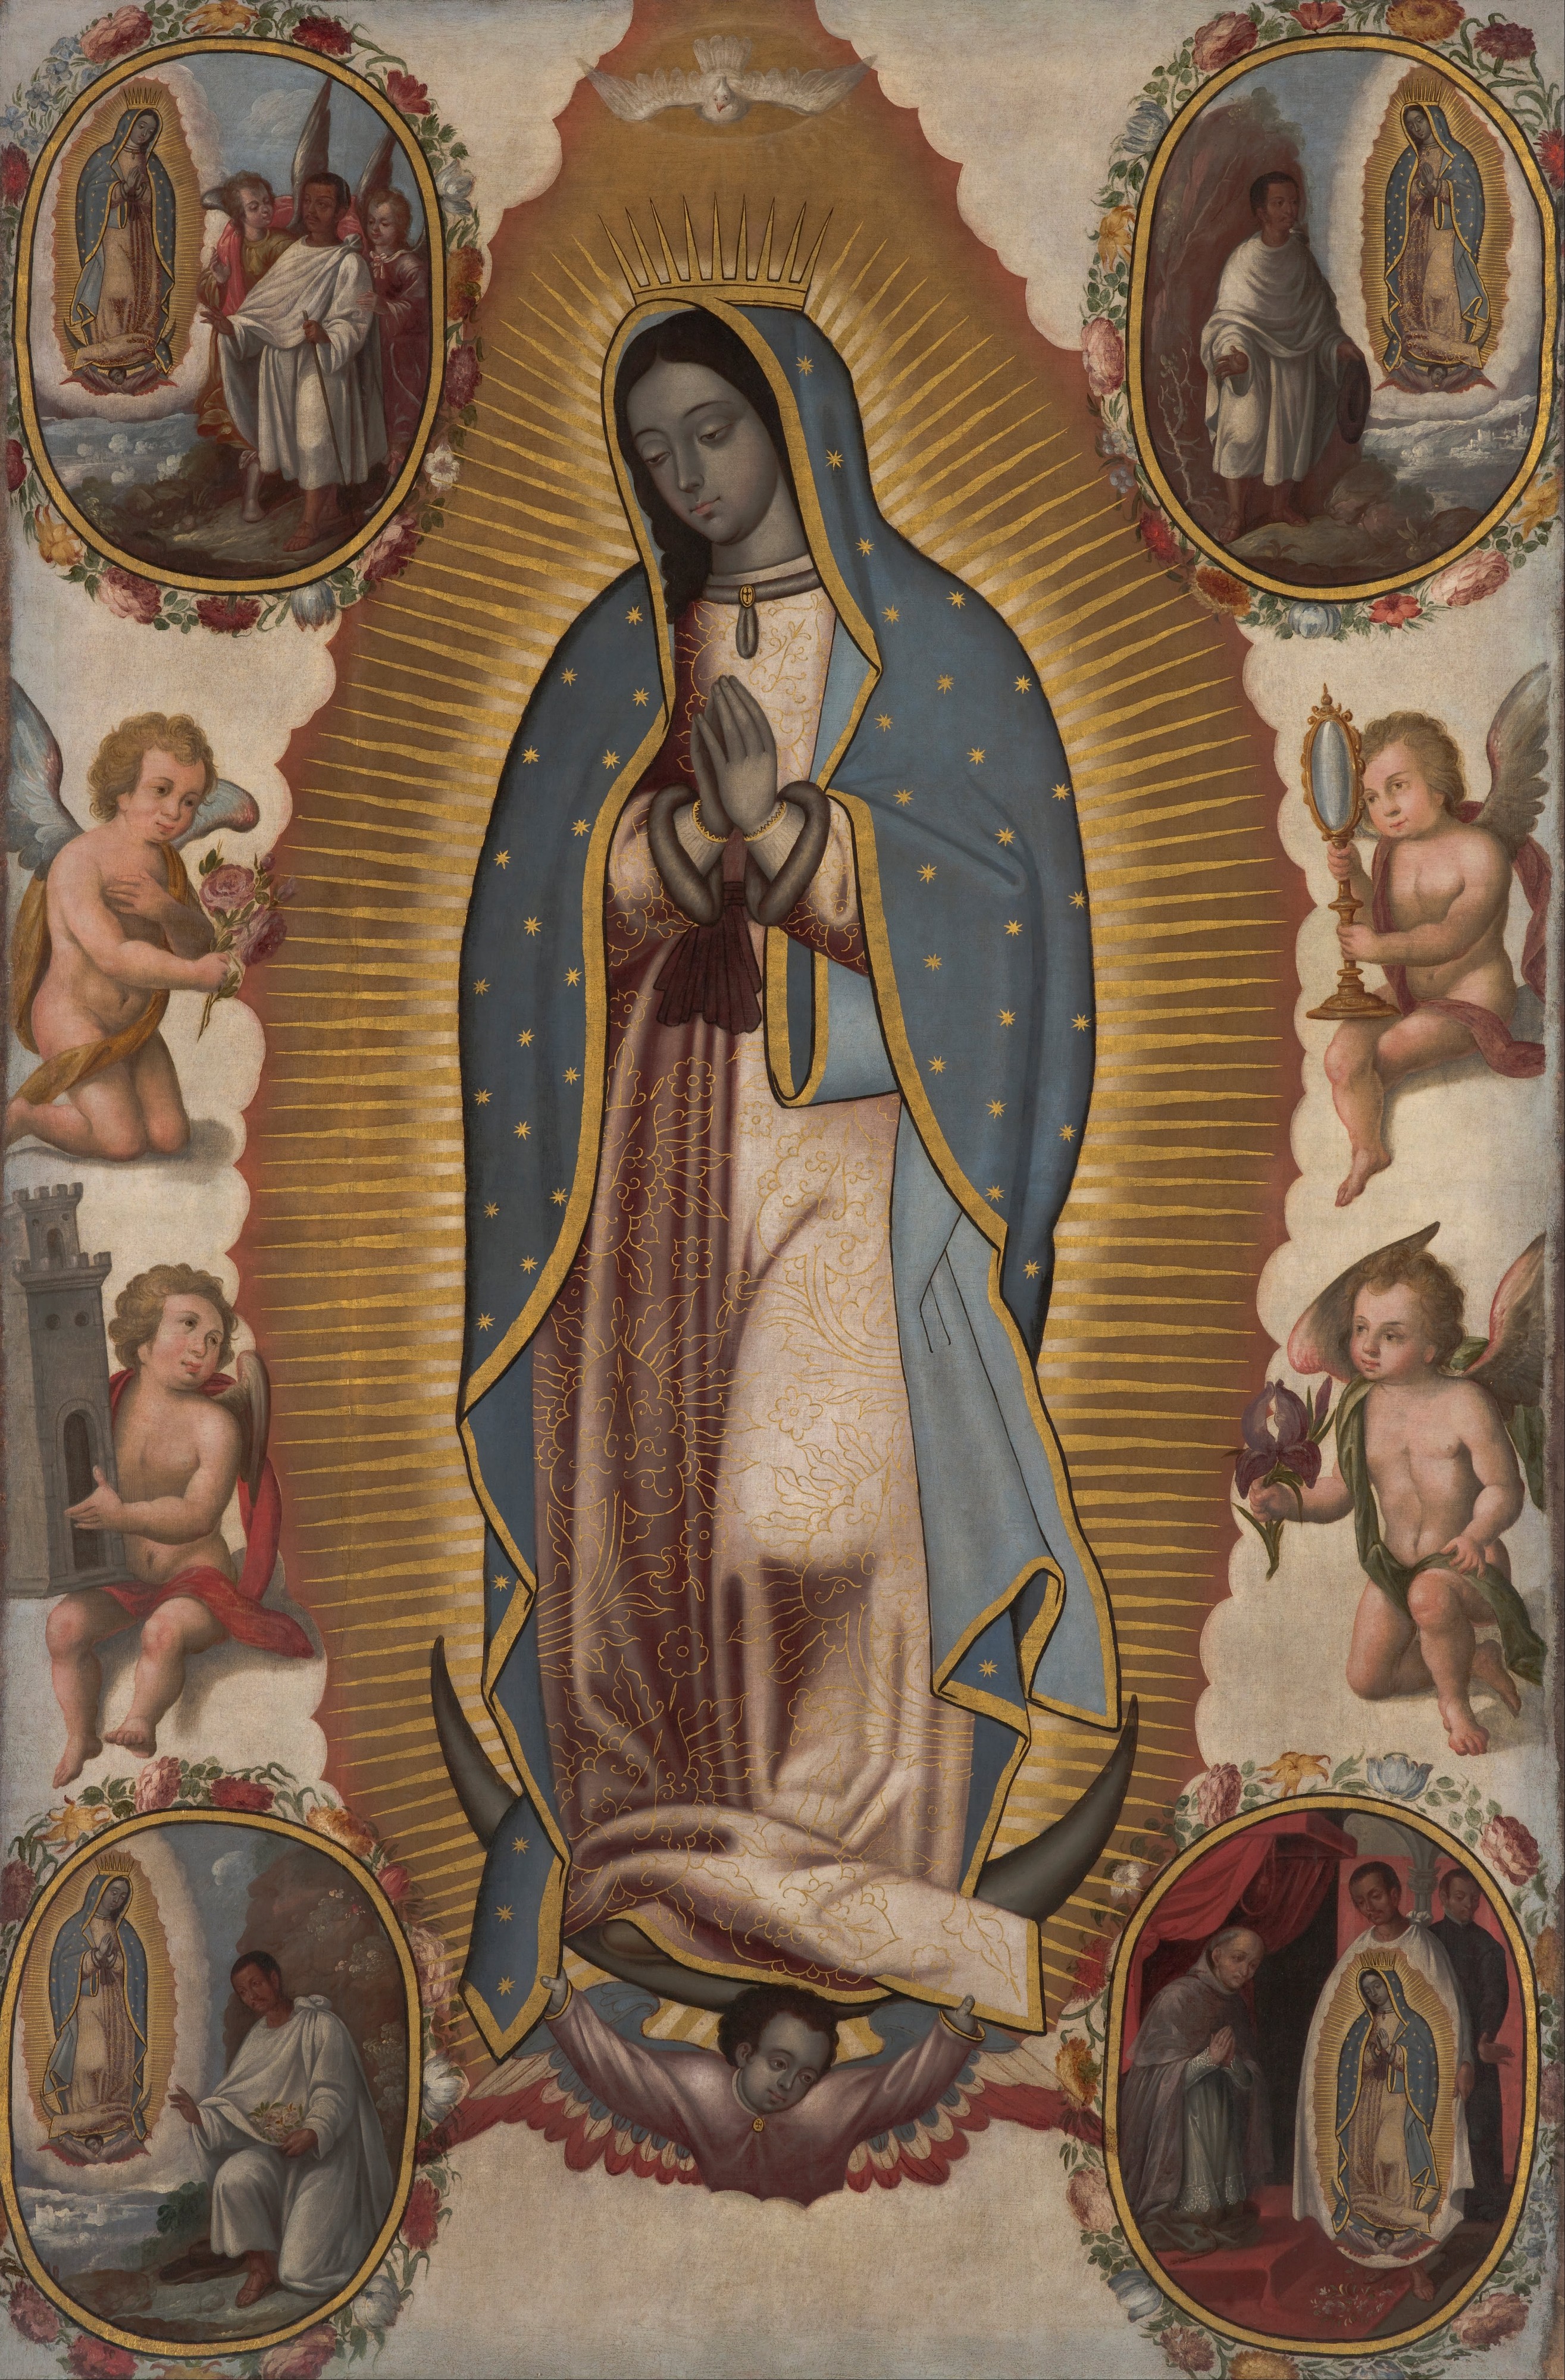 Virgin of Guadalupe - Google Art Project